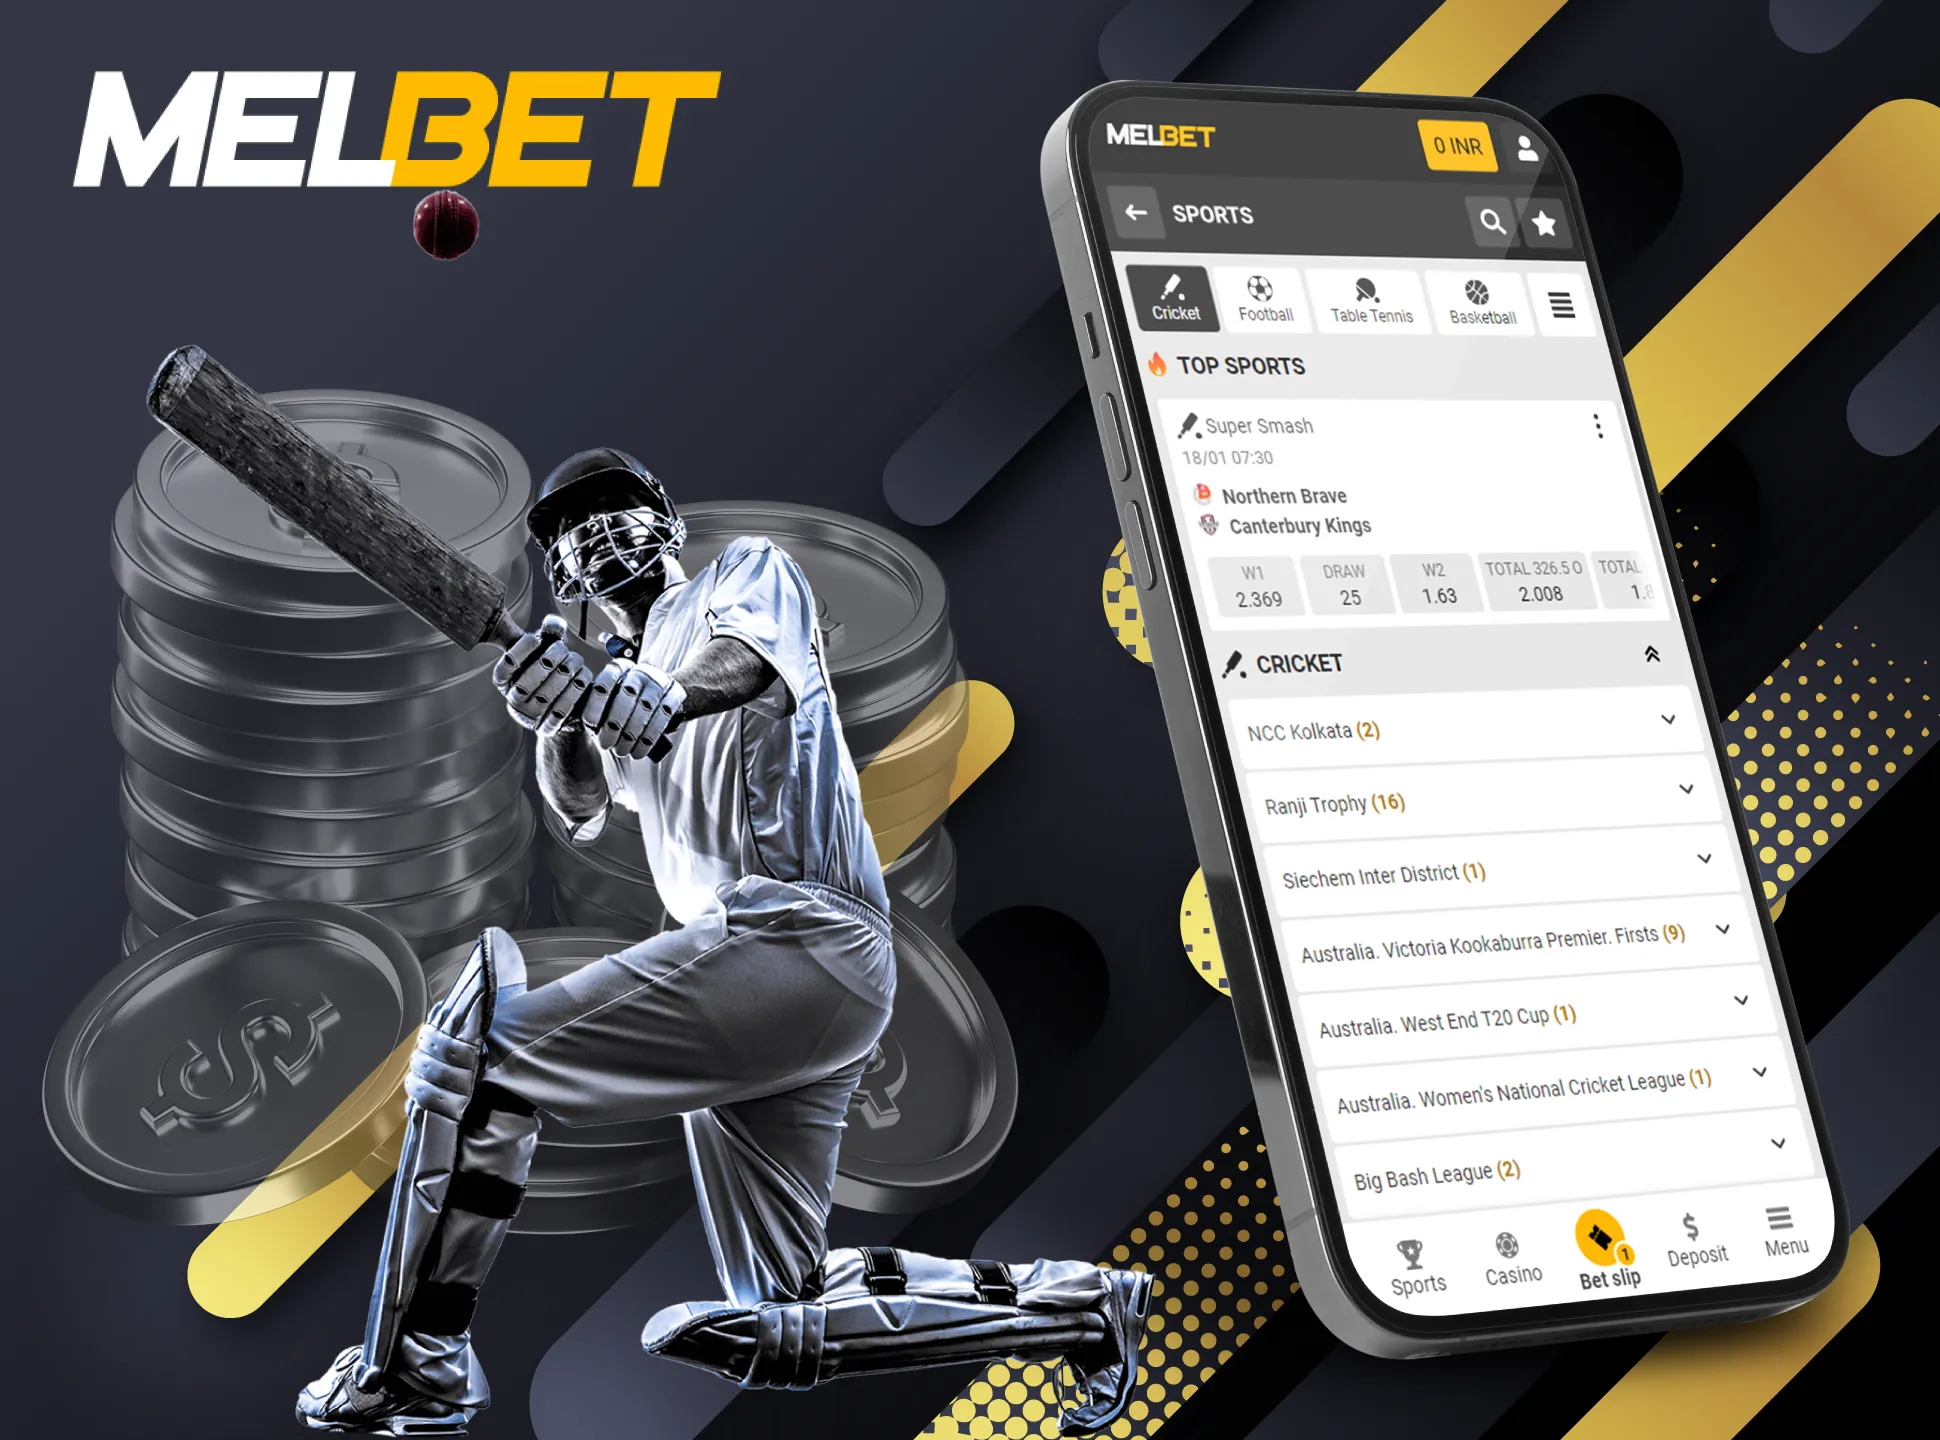 Cricket betting is the most popular option in the Melbet sportsbook.